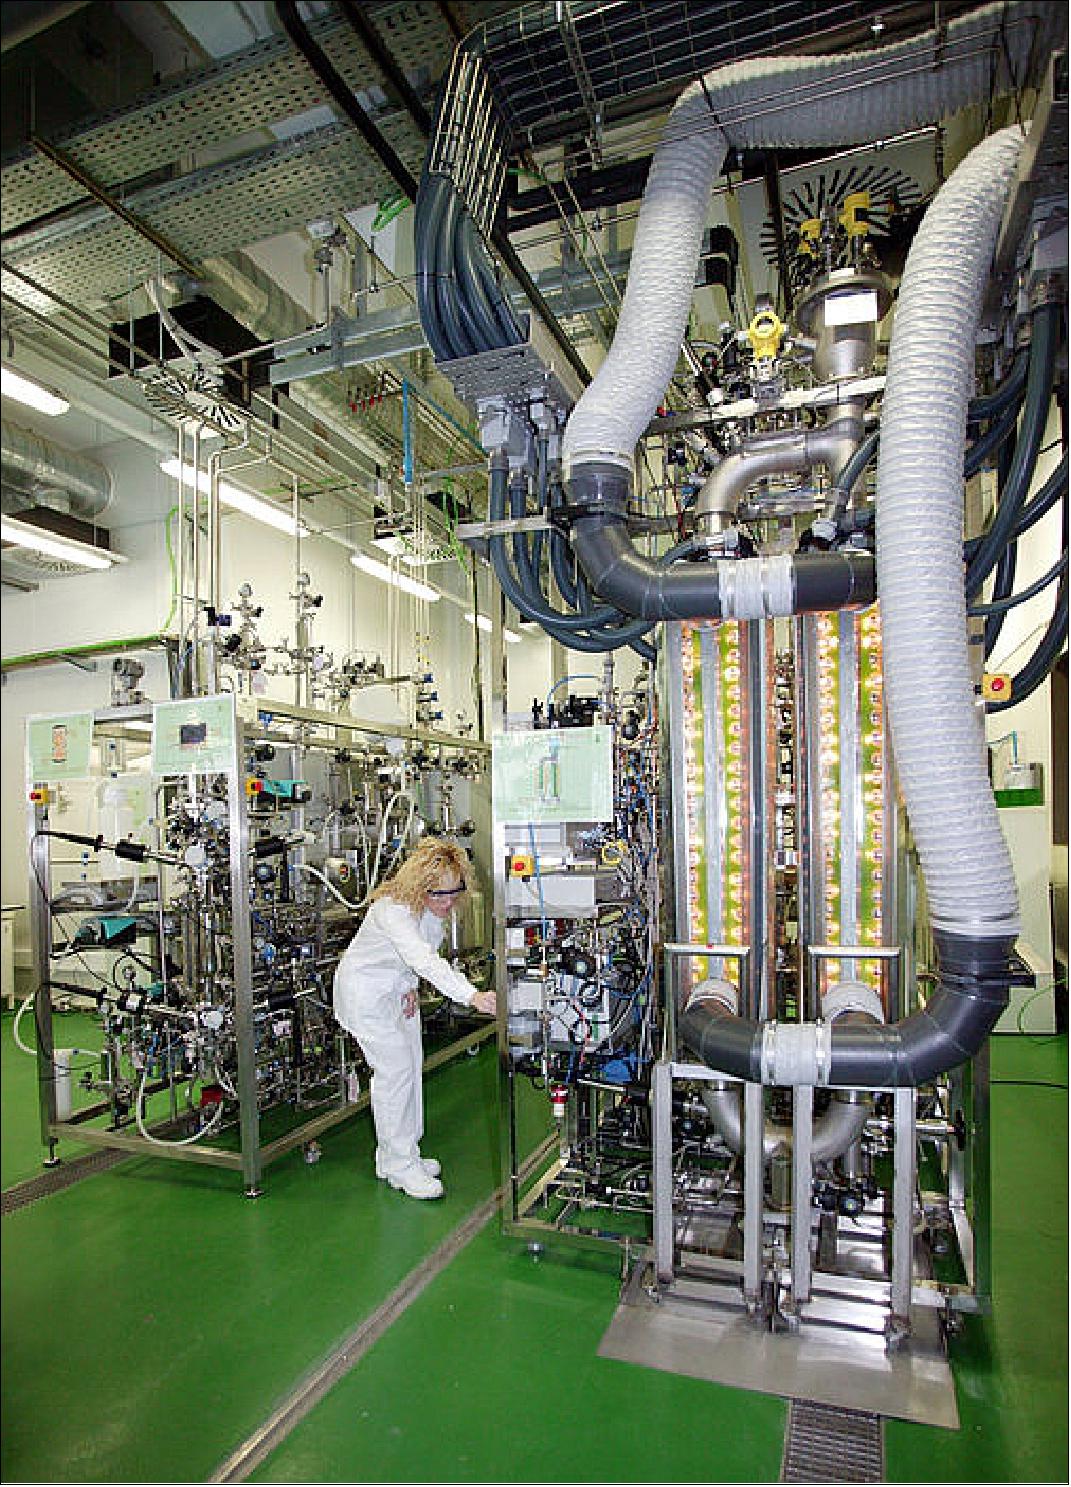 Figure 10: A view inside the MELiSSA pilot plant at the University Autònoma of Barcelona (UAB). The facility, with a room size of 200 m2, was inaugurated on 4 June 2009 by Spanish Minister for Science and Innovation Cristina Garmendia, ESA Director General Jean-Jacques Dordain and University rector Ana Ripoll. MELiSSA is investigating ways of producing food, water and oxygen on long manned space missions with limited supplies. The goal is to support the human exploration of the Solar System, as well as meeting pressing challenges on Earth (image credit: UAB)